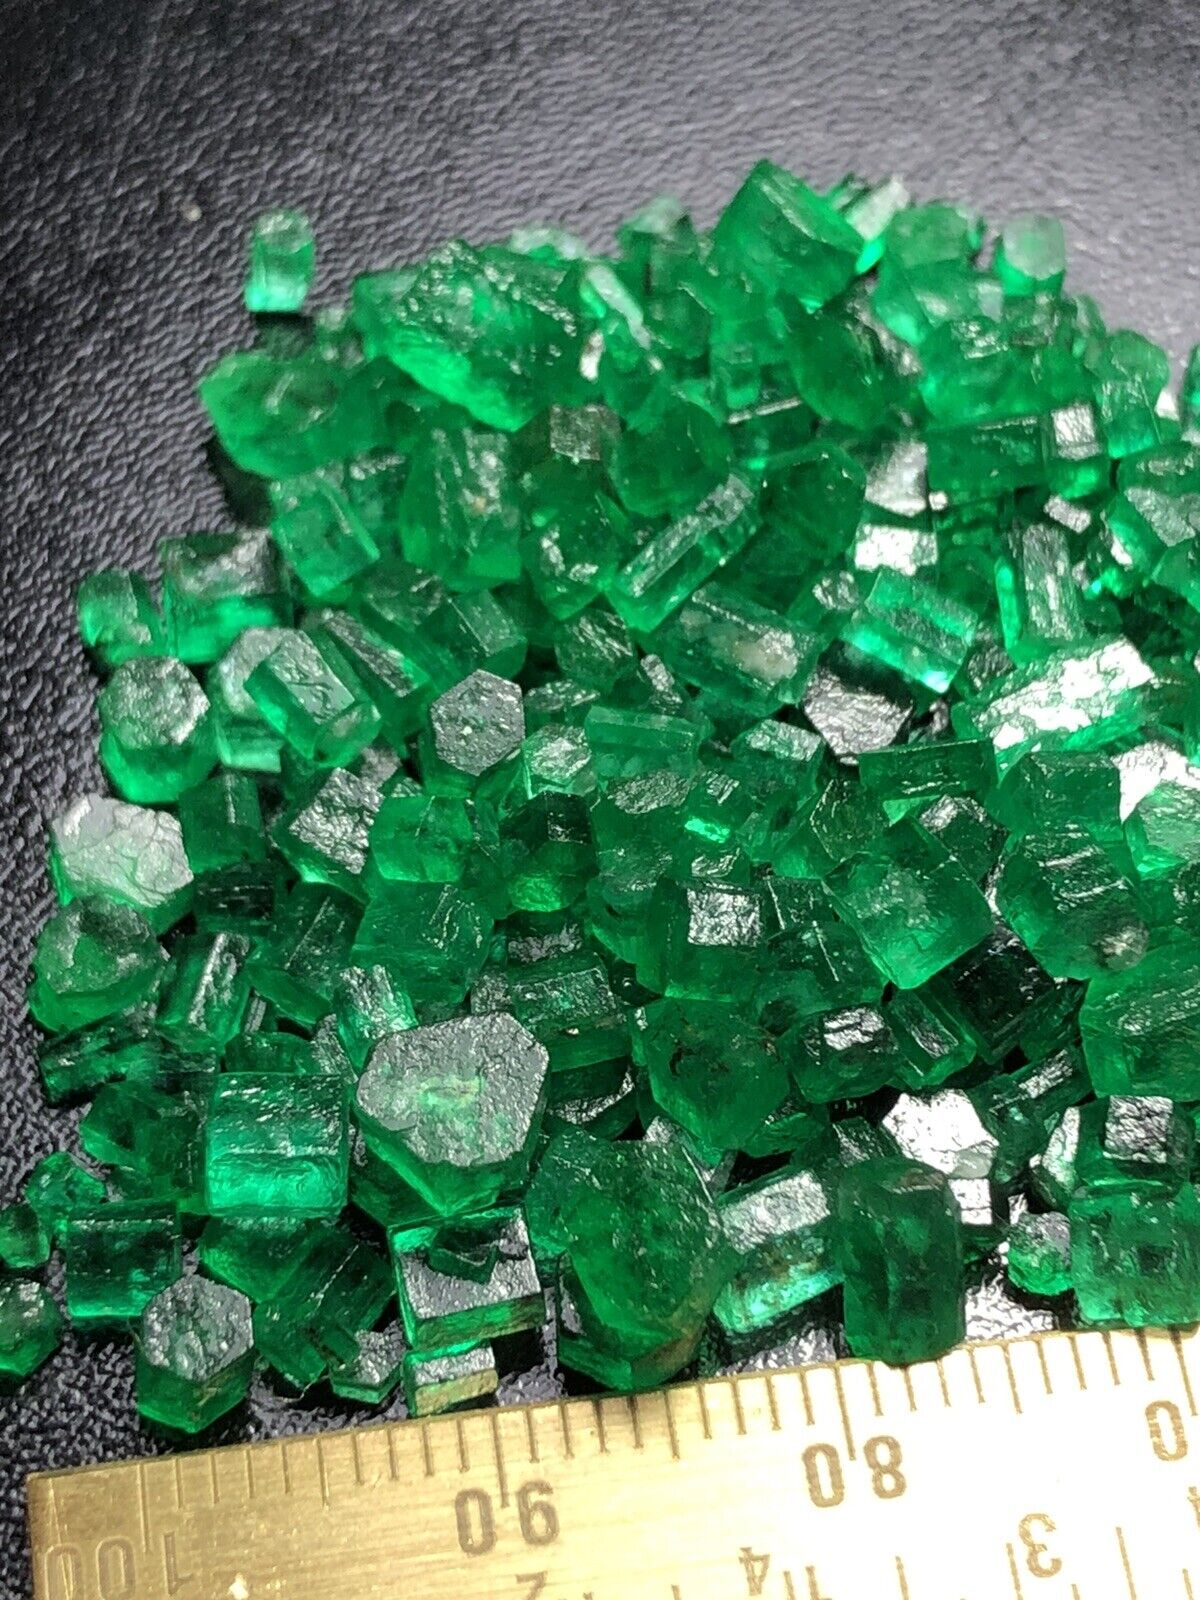 65-CT Facets Grade Top Quality Jewelry Size Natural Emerald Cr @Swat Mine Pak